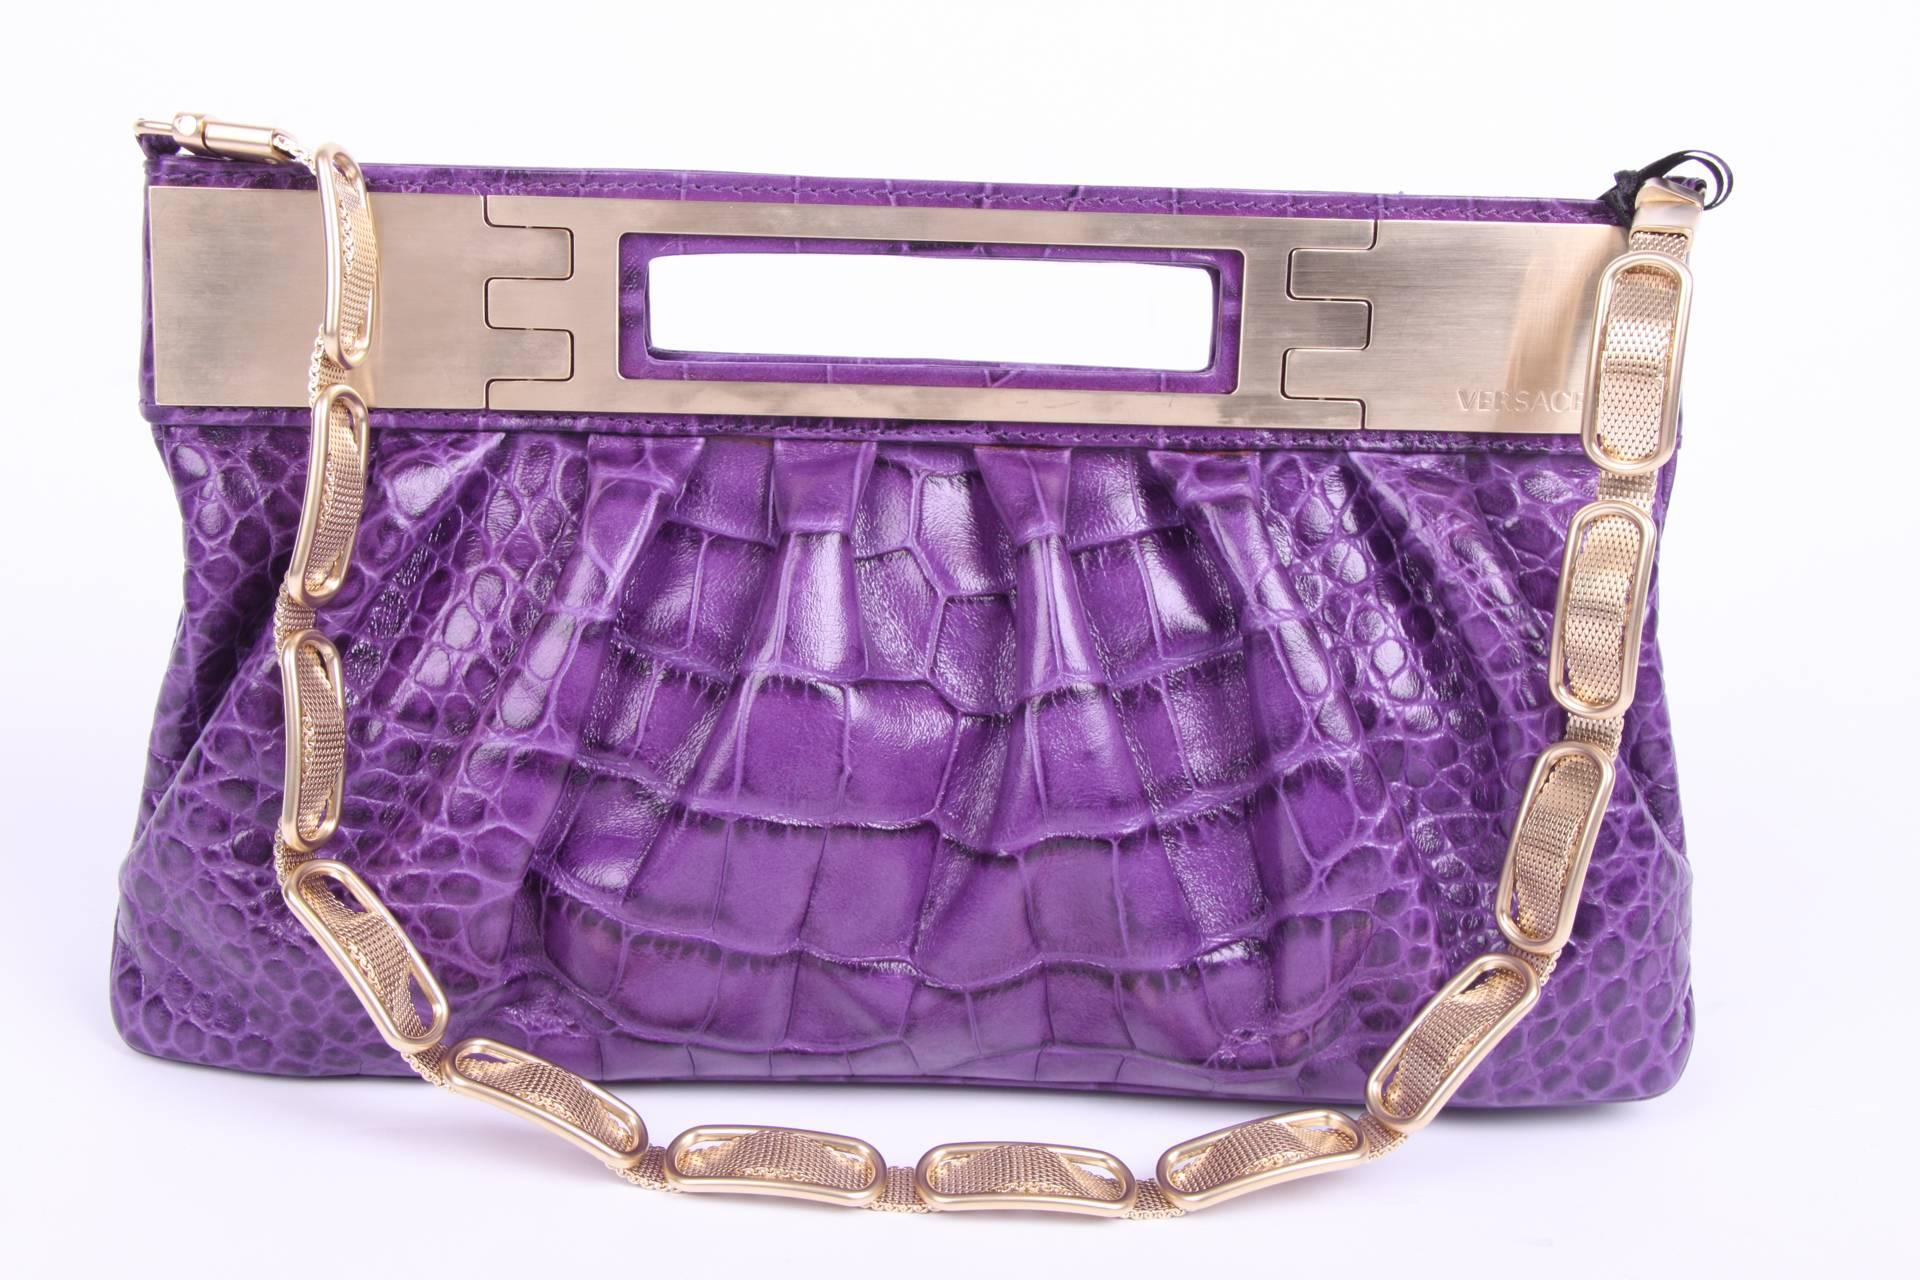 Versace Leather Clutch Croco Print - purple 2008 In Excellent Condition For Sale In Baarn, NL